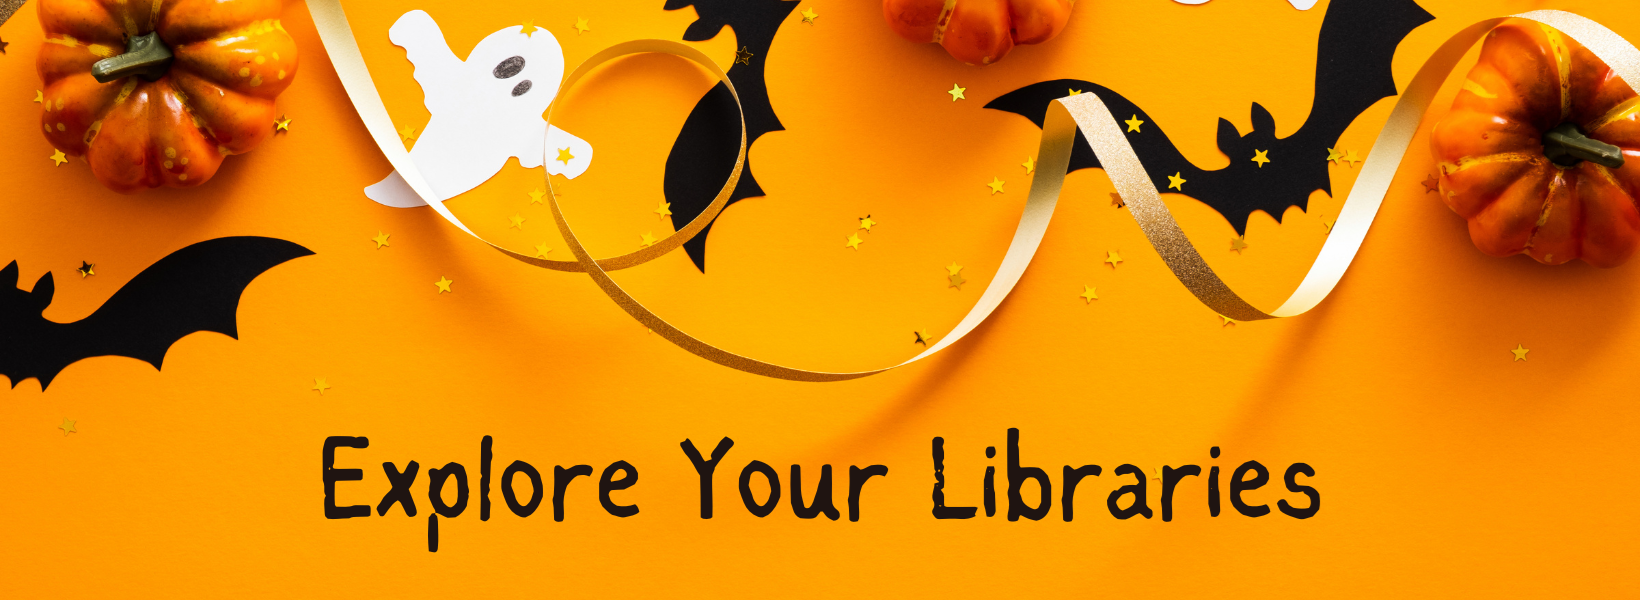 Graphic that reads "explore your libraries" with bats, pumpkins, ghosts and a ribbon.